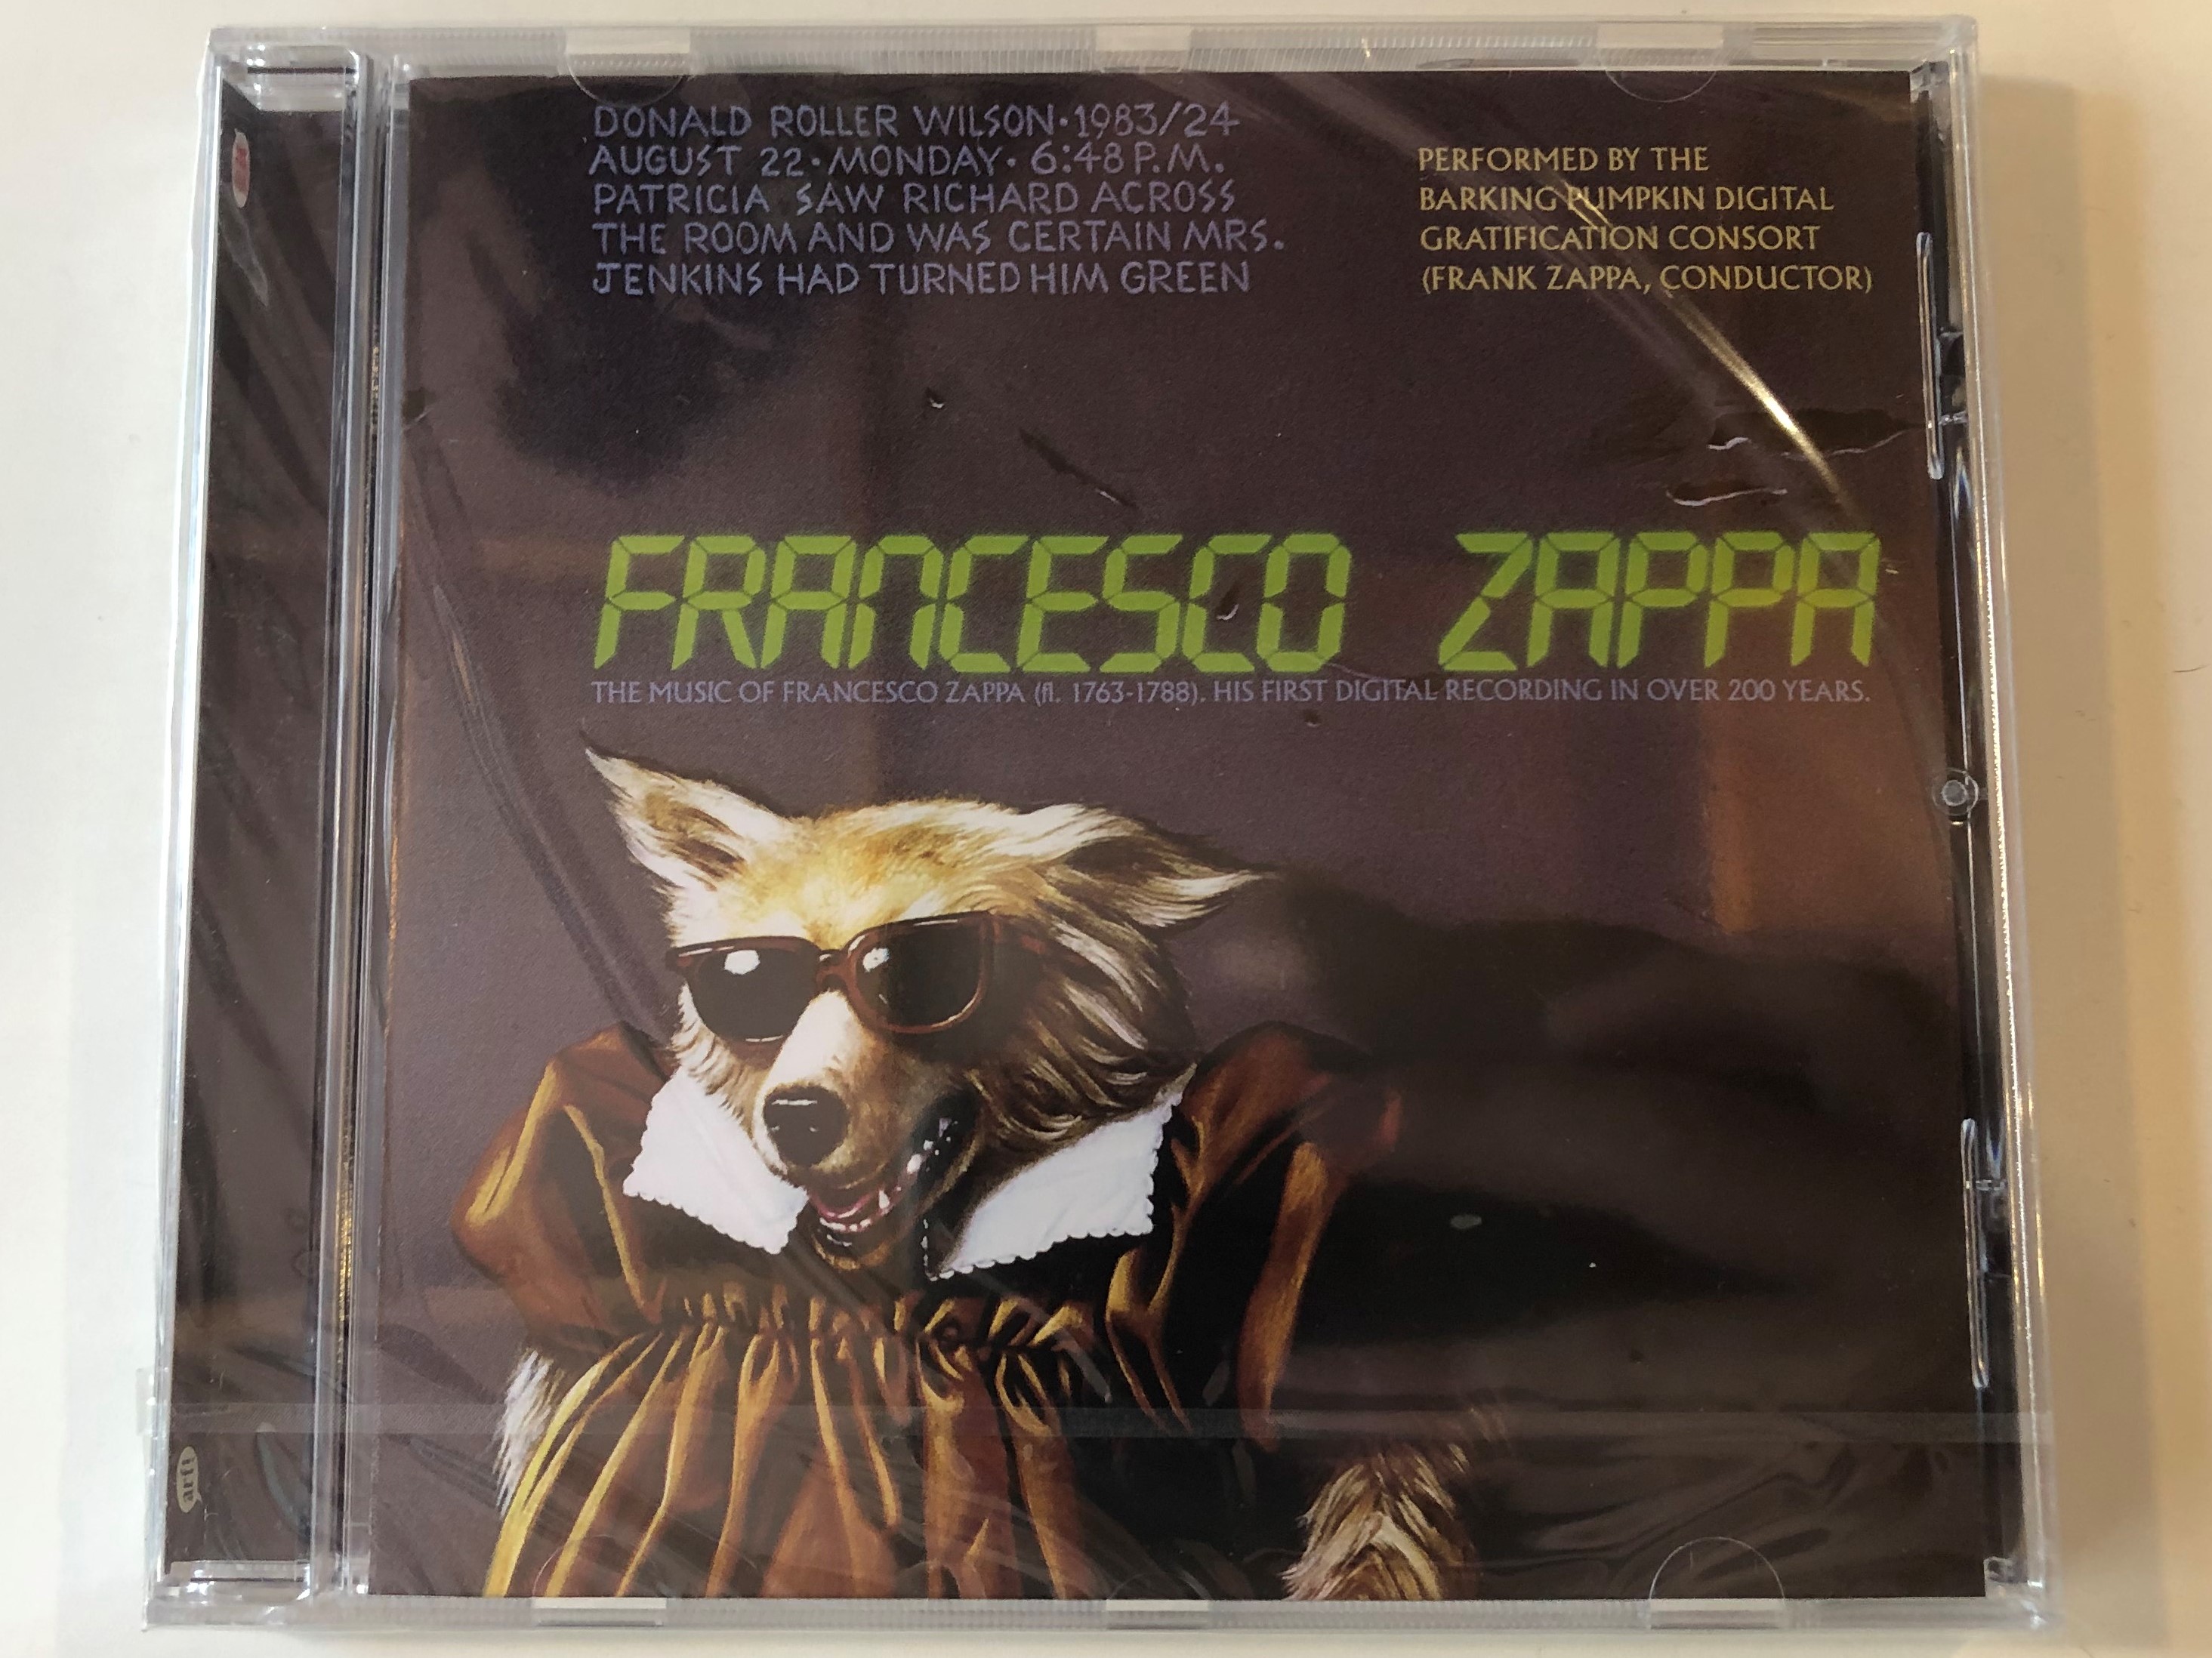 francesco-zappa-the-music-of-francesco-zappa-fl.-1763-1788-.-his-first-digital-recording-in-over-200-years.-performed-by-the-barking-pumpkin-digital-gratification-consort-frank-zappa-conduct-1-.jpg